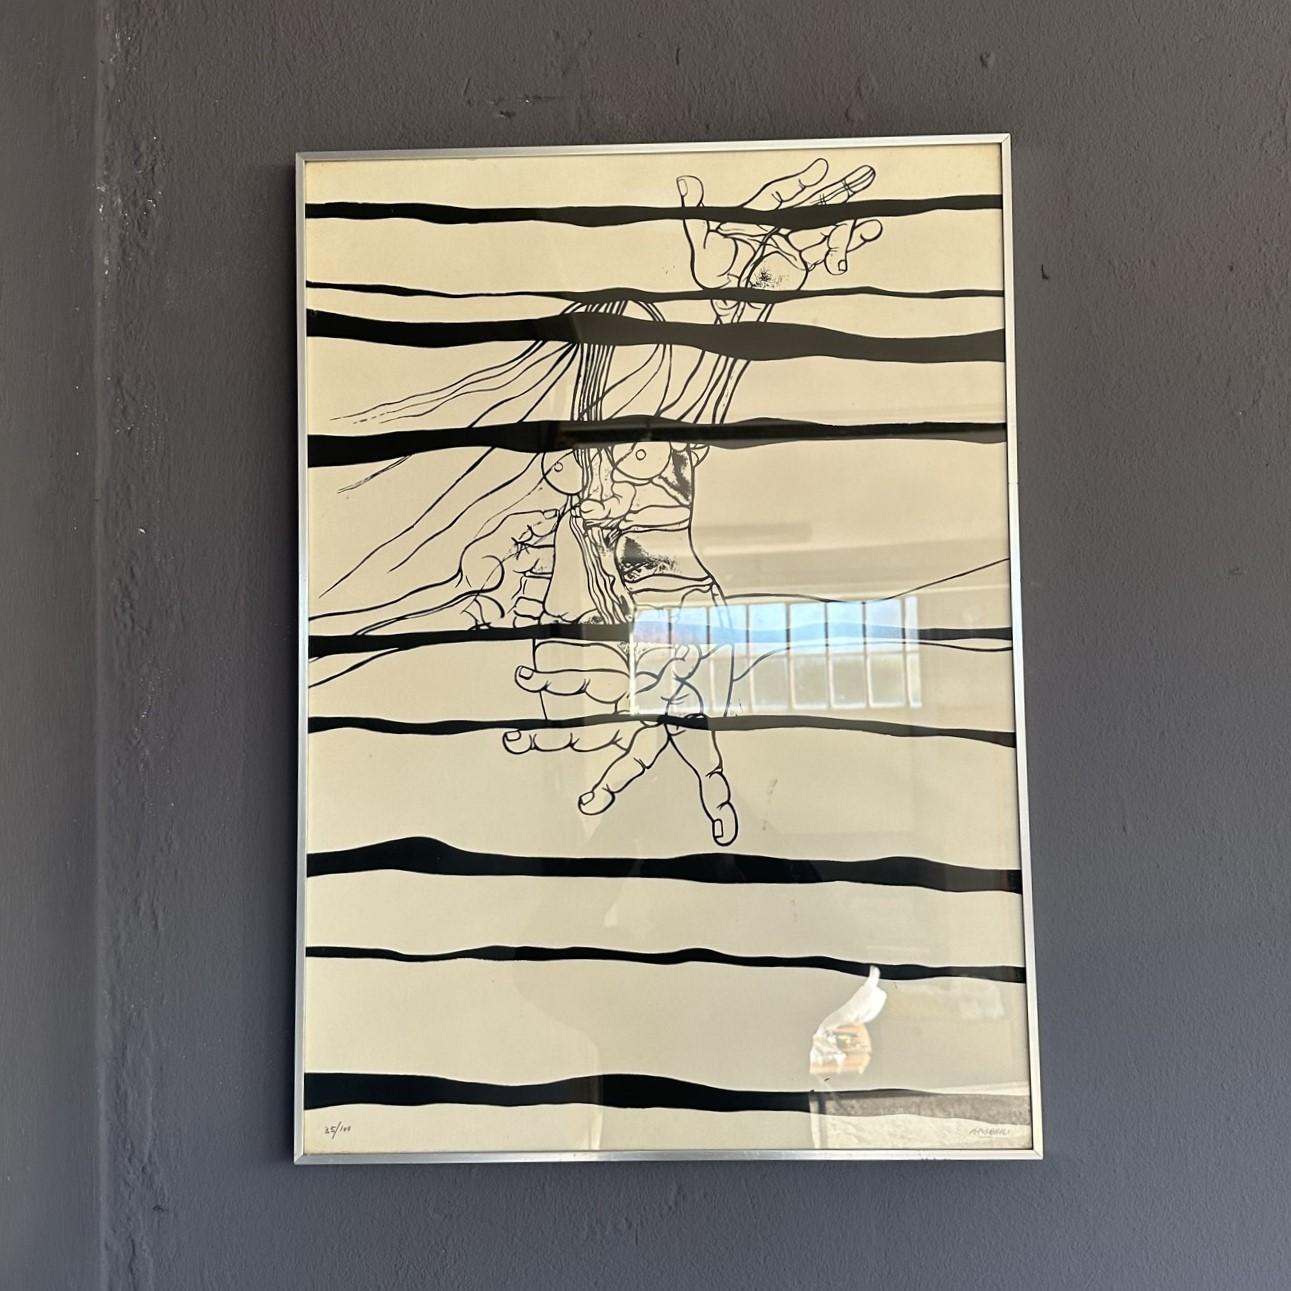 Silkscreen on paper by Agenore Fabbri, 1971
Silkscreen created on a white paper background with a black figurative-abstract design.
At the bottom right there is the signature, while at the bottom left the numbering of the screen print is visible,